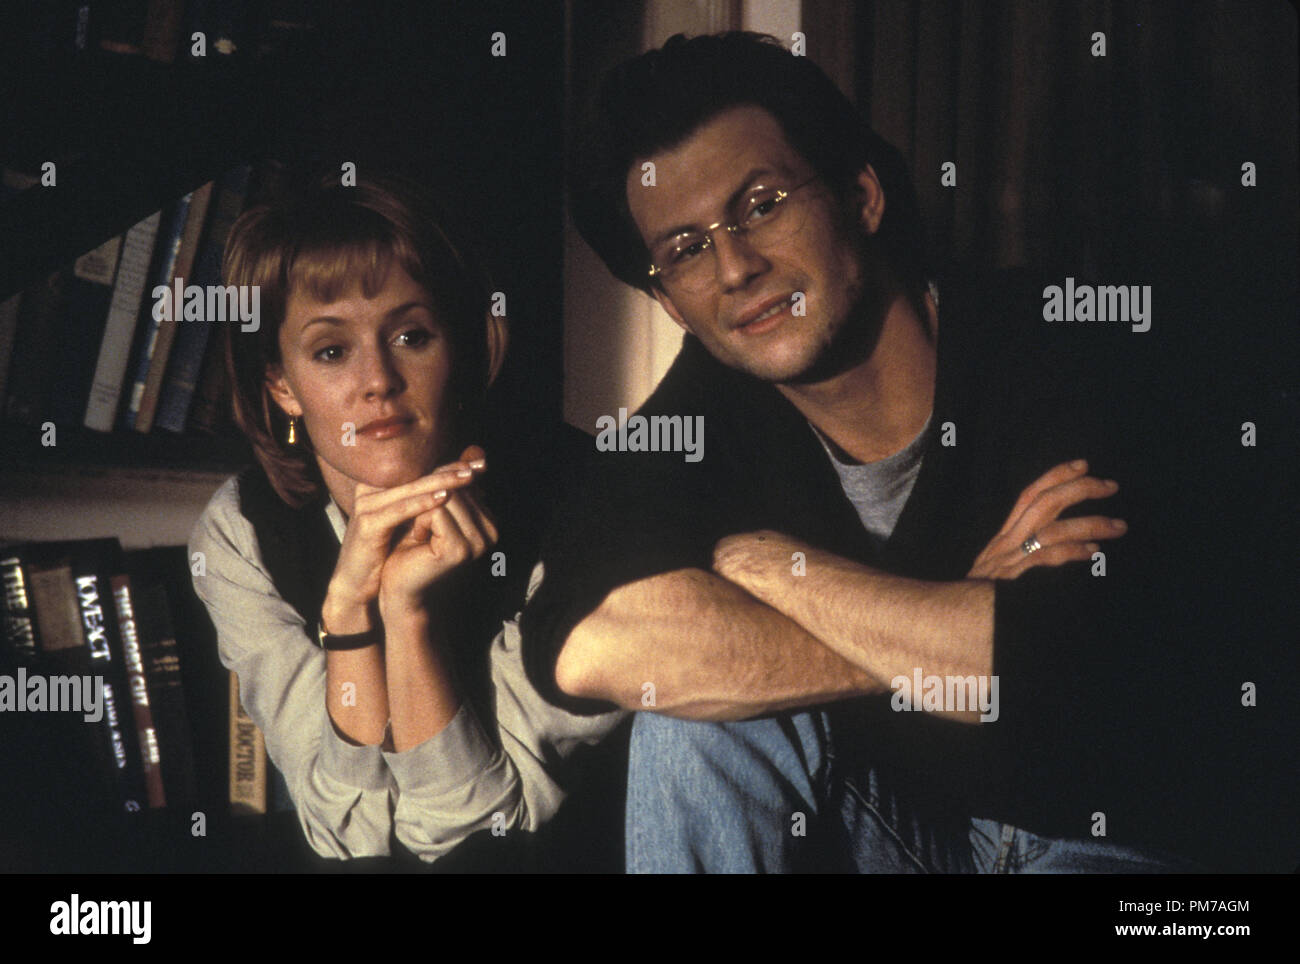 Film Still from 'Bed of Roses' Mary Stuart Masterson, Christian Slater © 1996 Newline Photo Credit: Lou Golden  File Reference # 31042719THA  For Editorial Use Only - All Rights Reserved Stock Photo